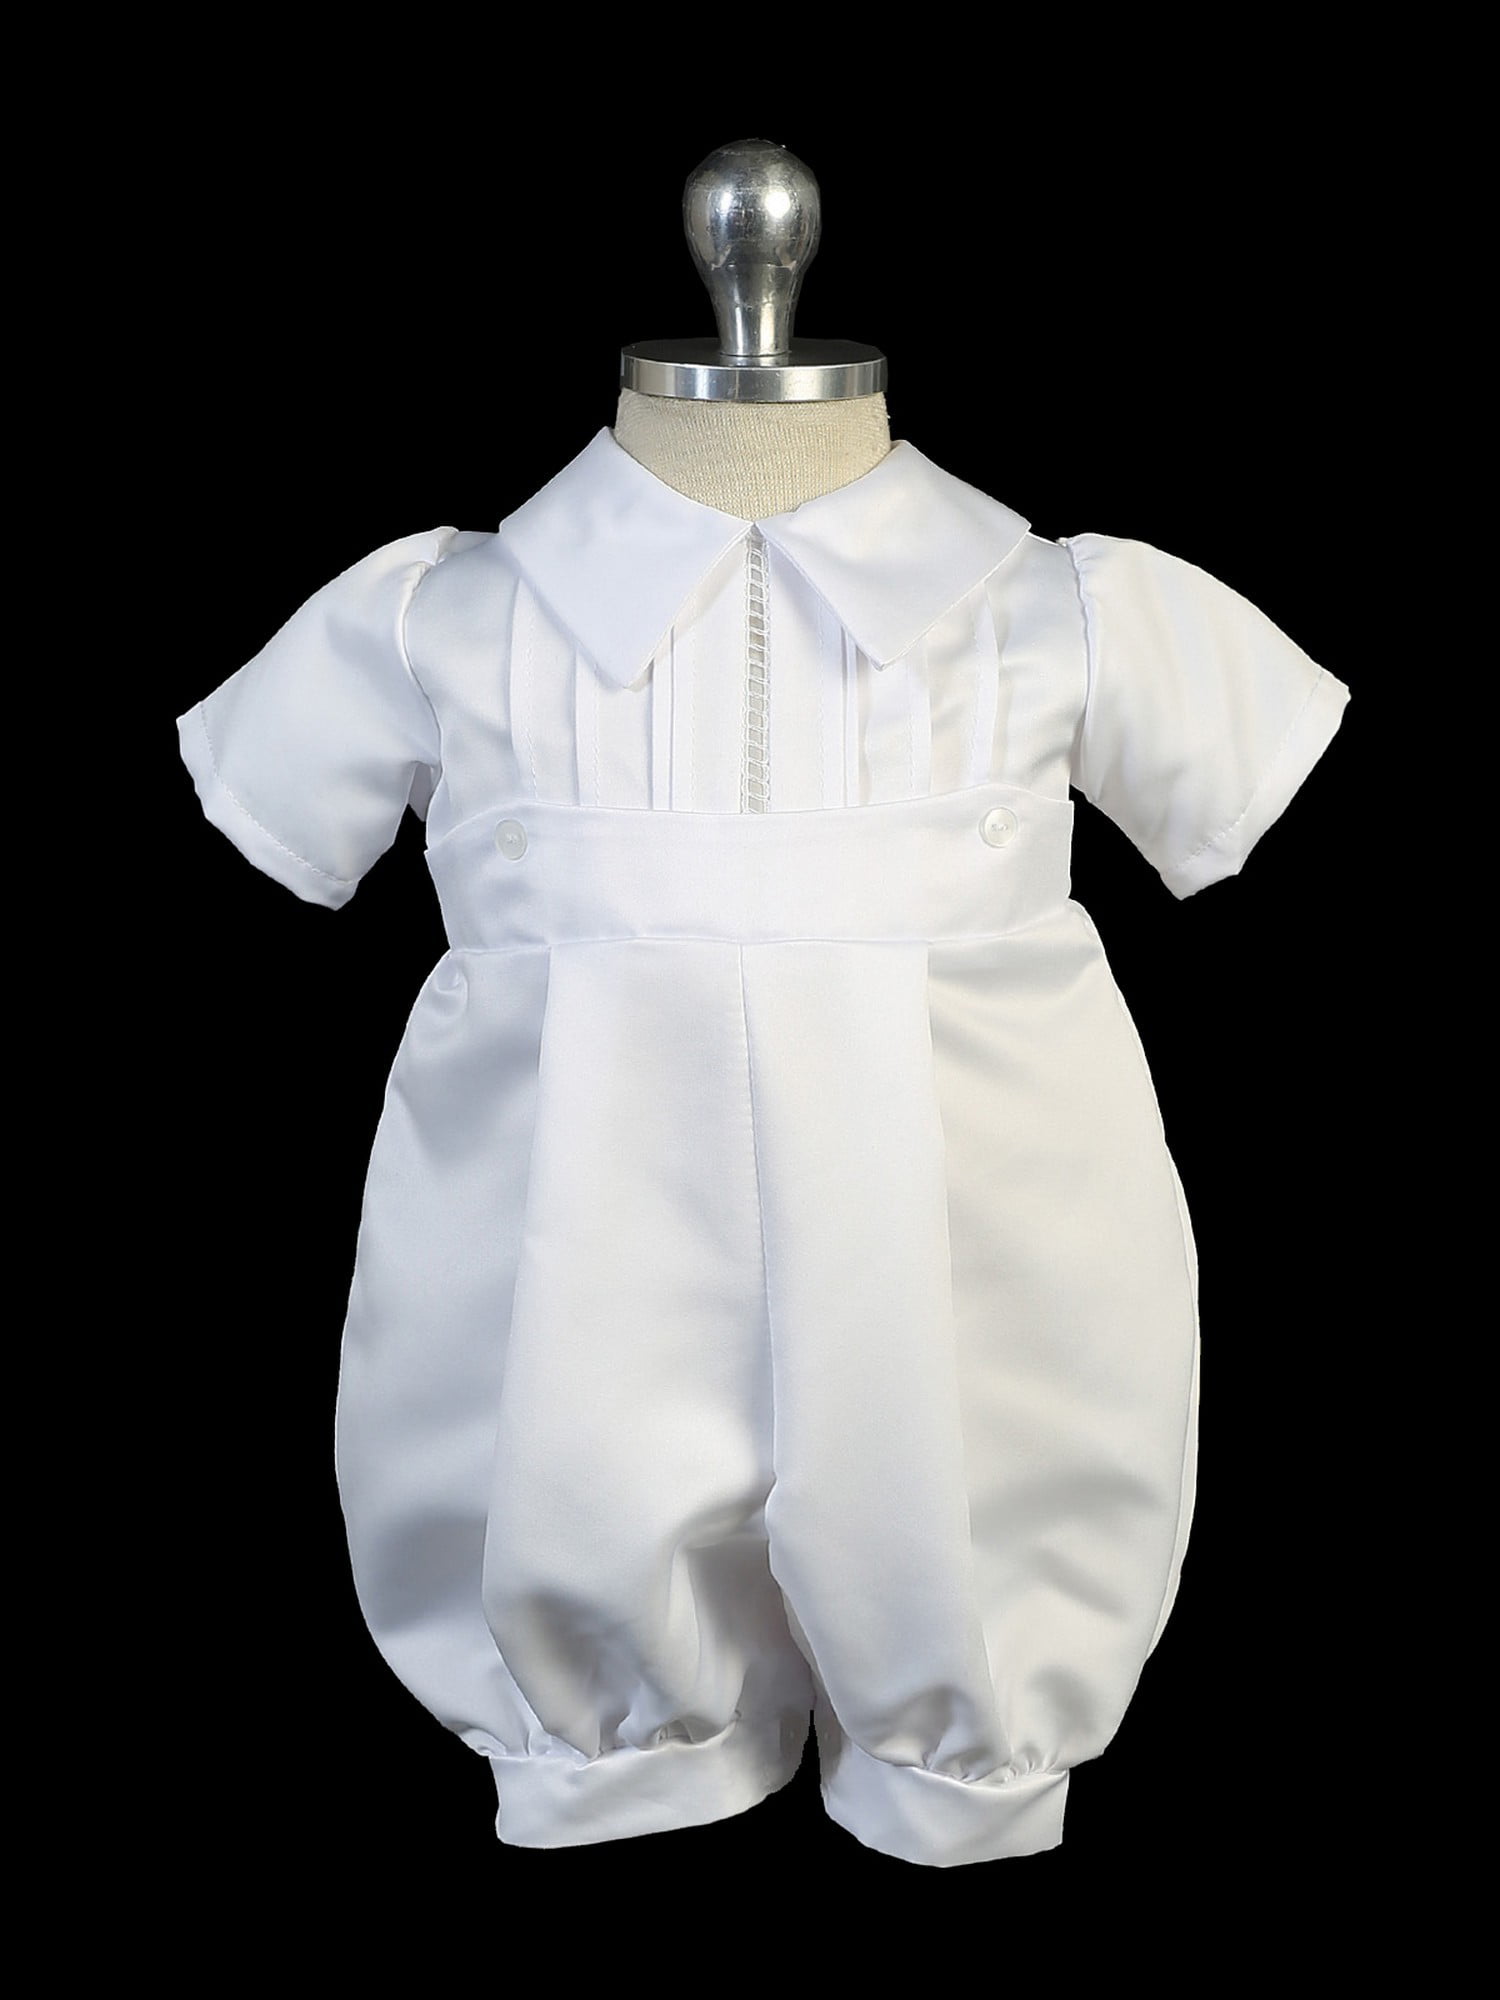 baptism outfit for baby boy